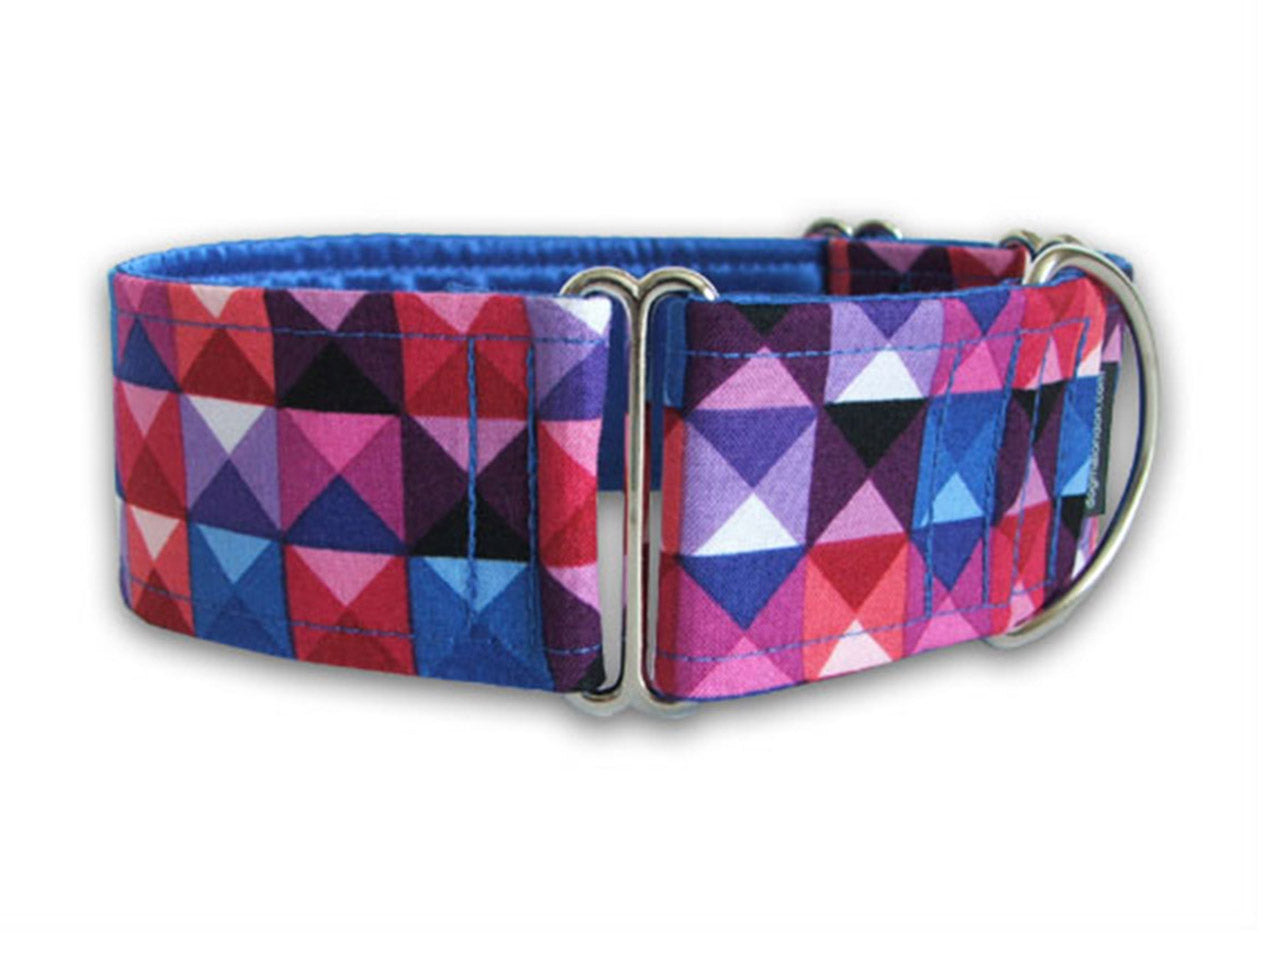 Cool triangle pattern in shades of blue and purple will give any pooch a modern vibe!